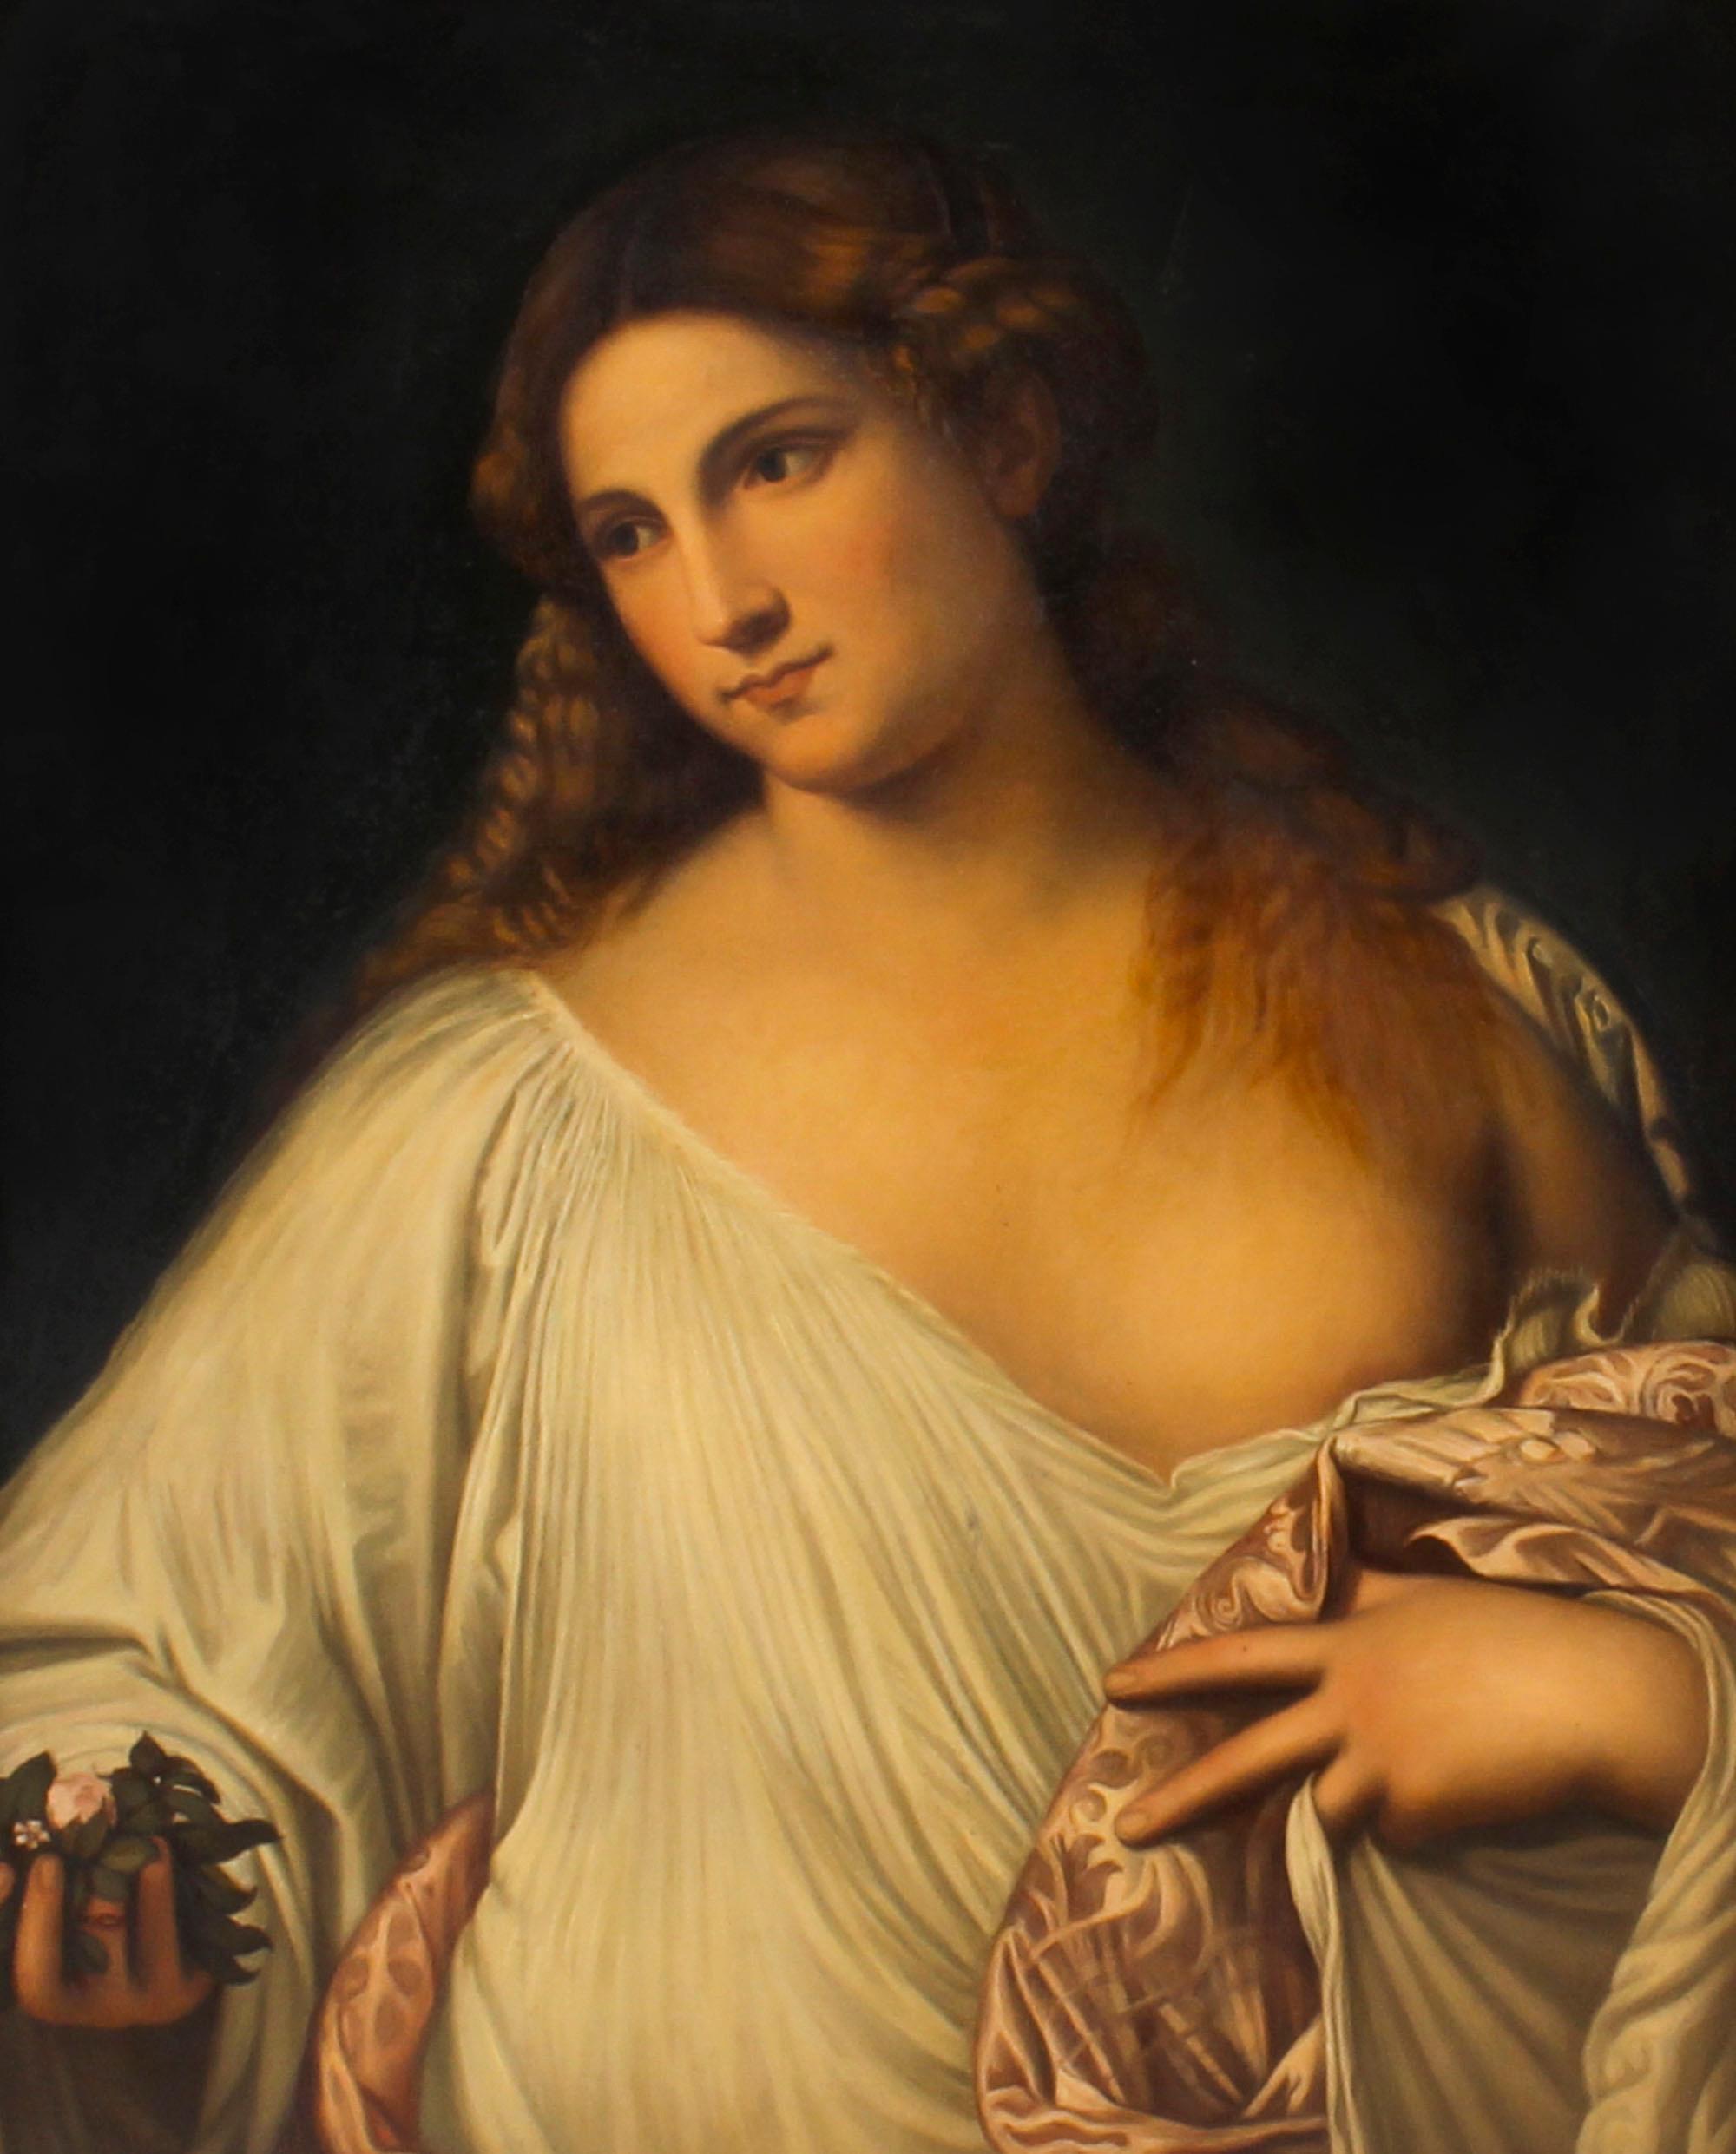 This is a magnificent large antique oil on canvas painting of Flora, after the Renaissance Italian painter, Titian (1488/90 -1576), circa 1850 in date.

Exactly as in the original painting which is currently displayed at the Galleria Uffizi in